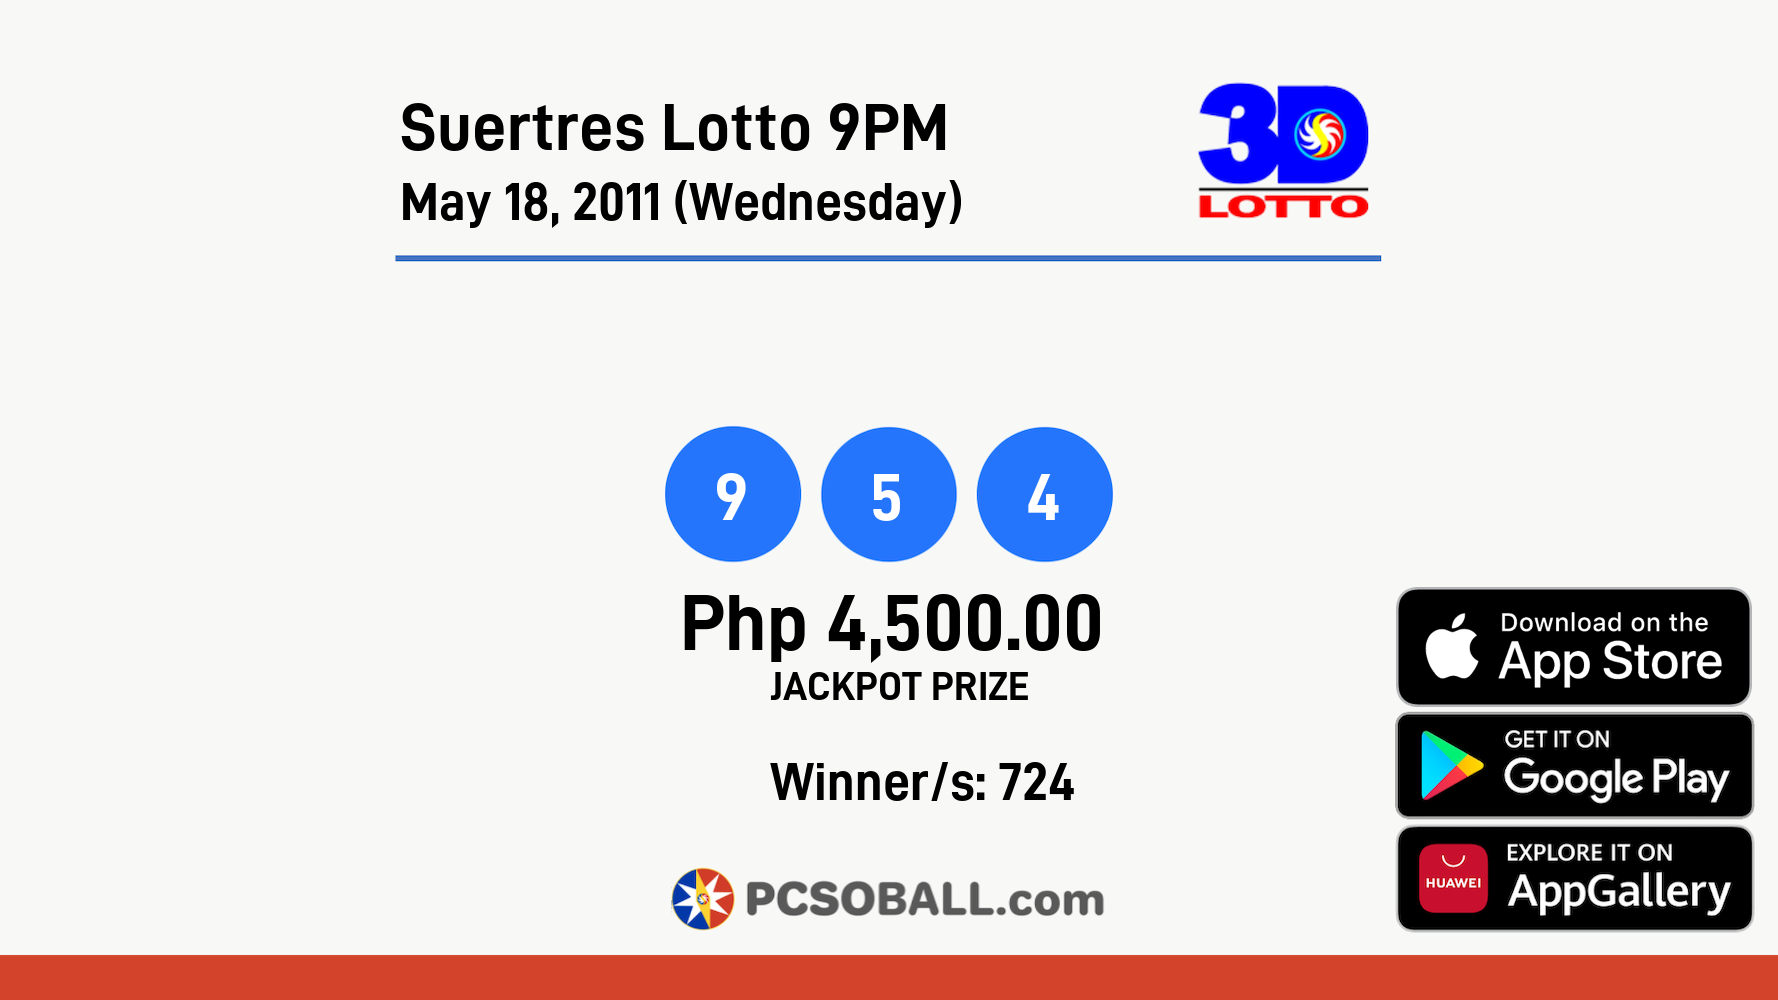 Suertres Lotto 9PM May 18, 2011 (Wednesday) Result